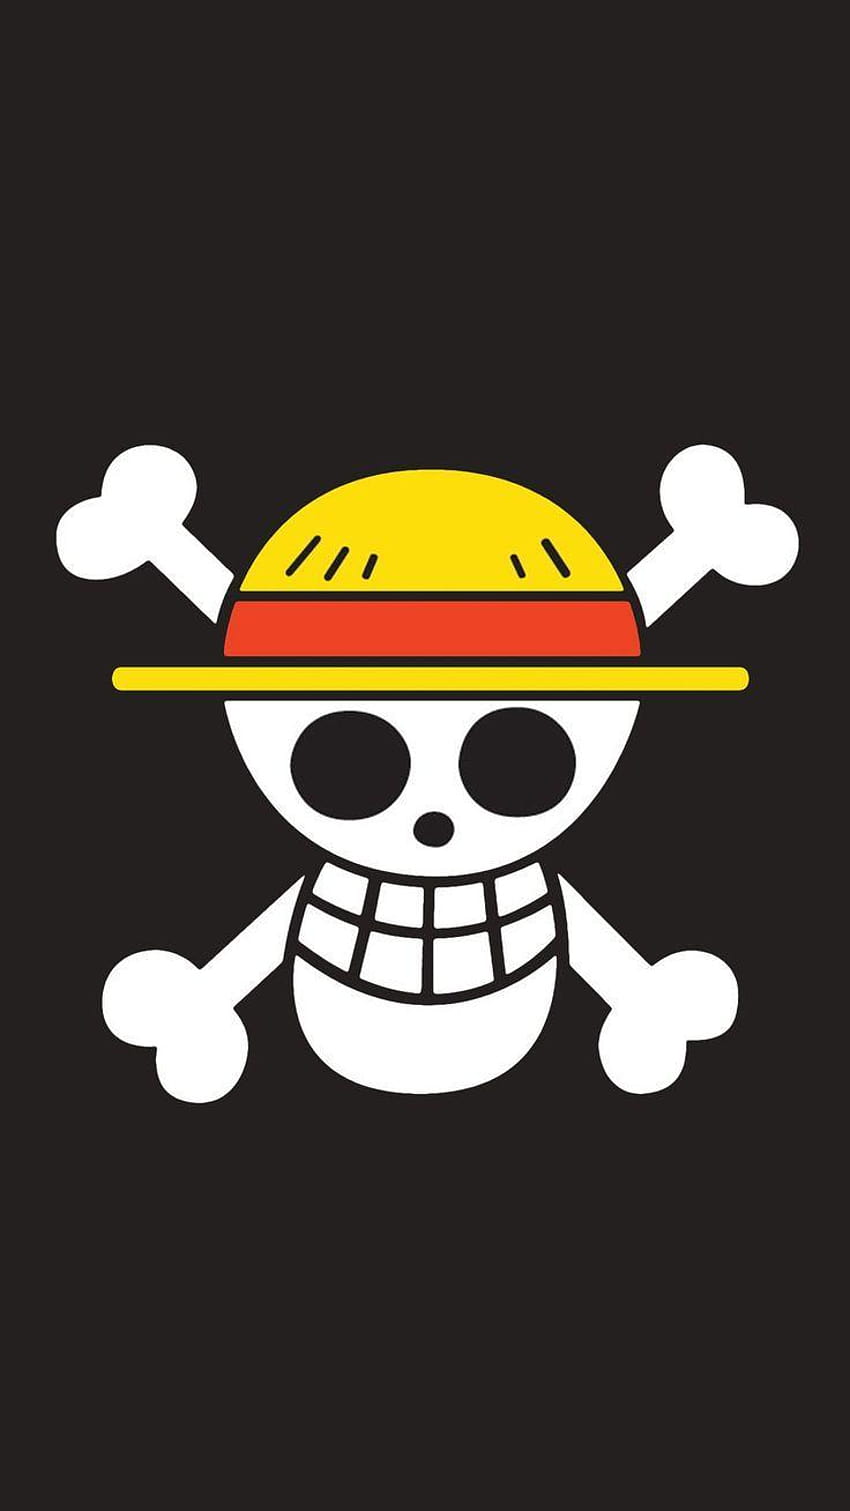 2 best ideas about One piece iphone, pirate flag HD phone wallpaper